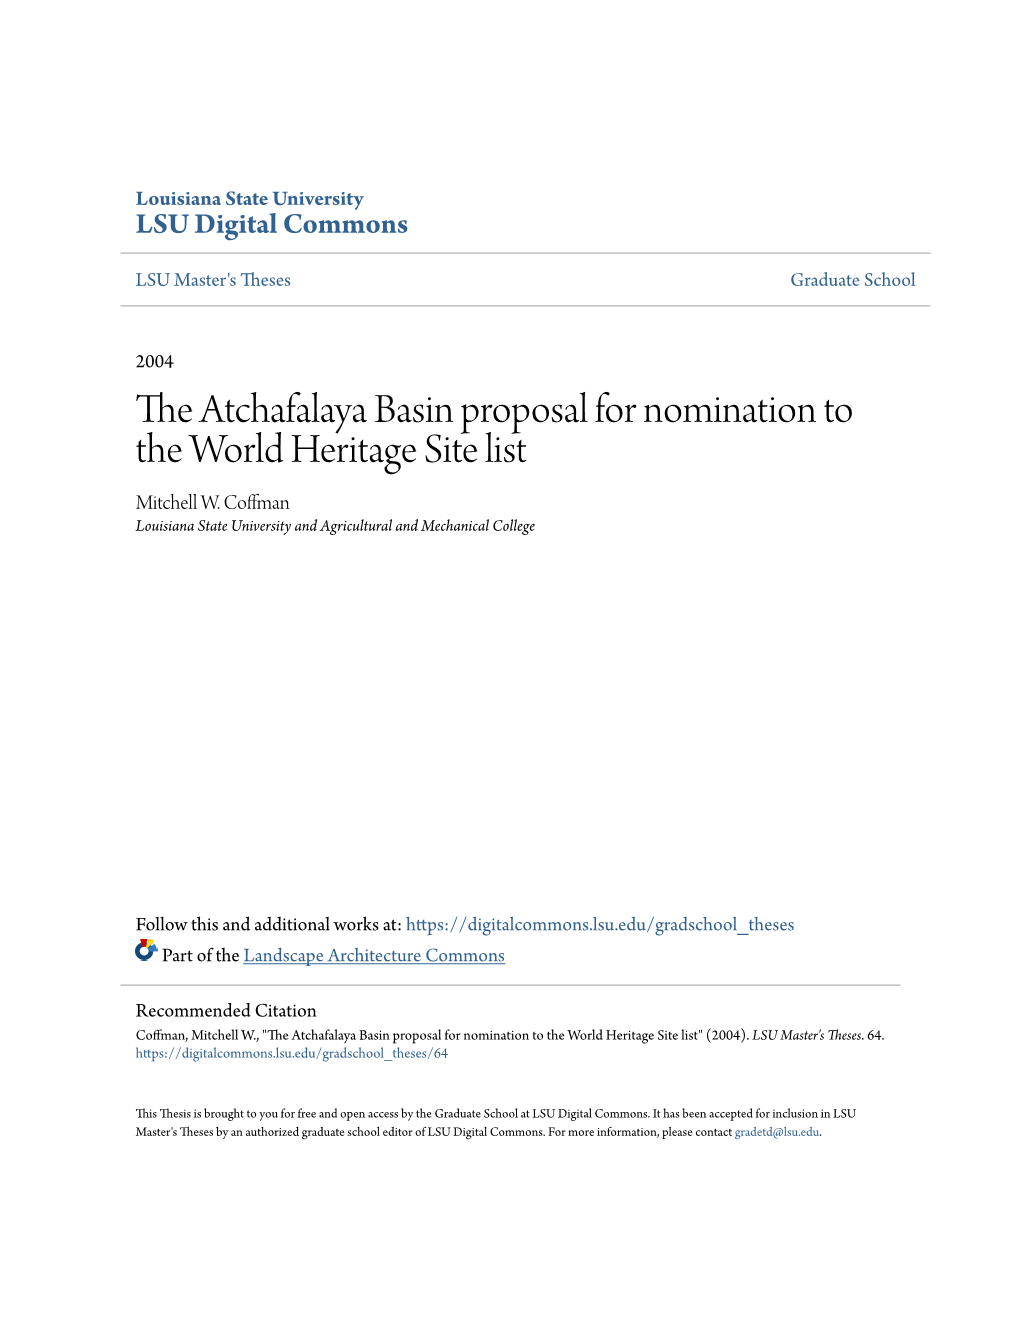 The Atchafalaya Basin Proposal for Nomination to the World Heritage Site List Mitchell W